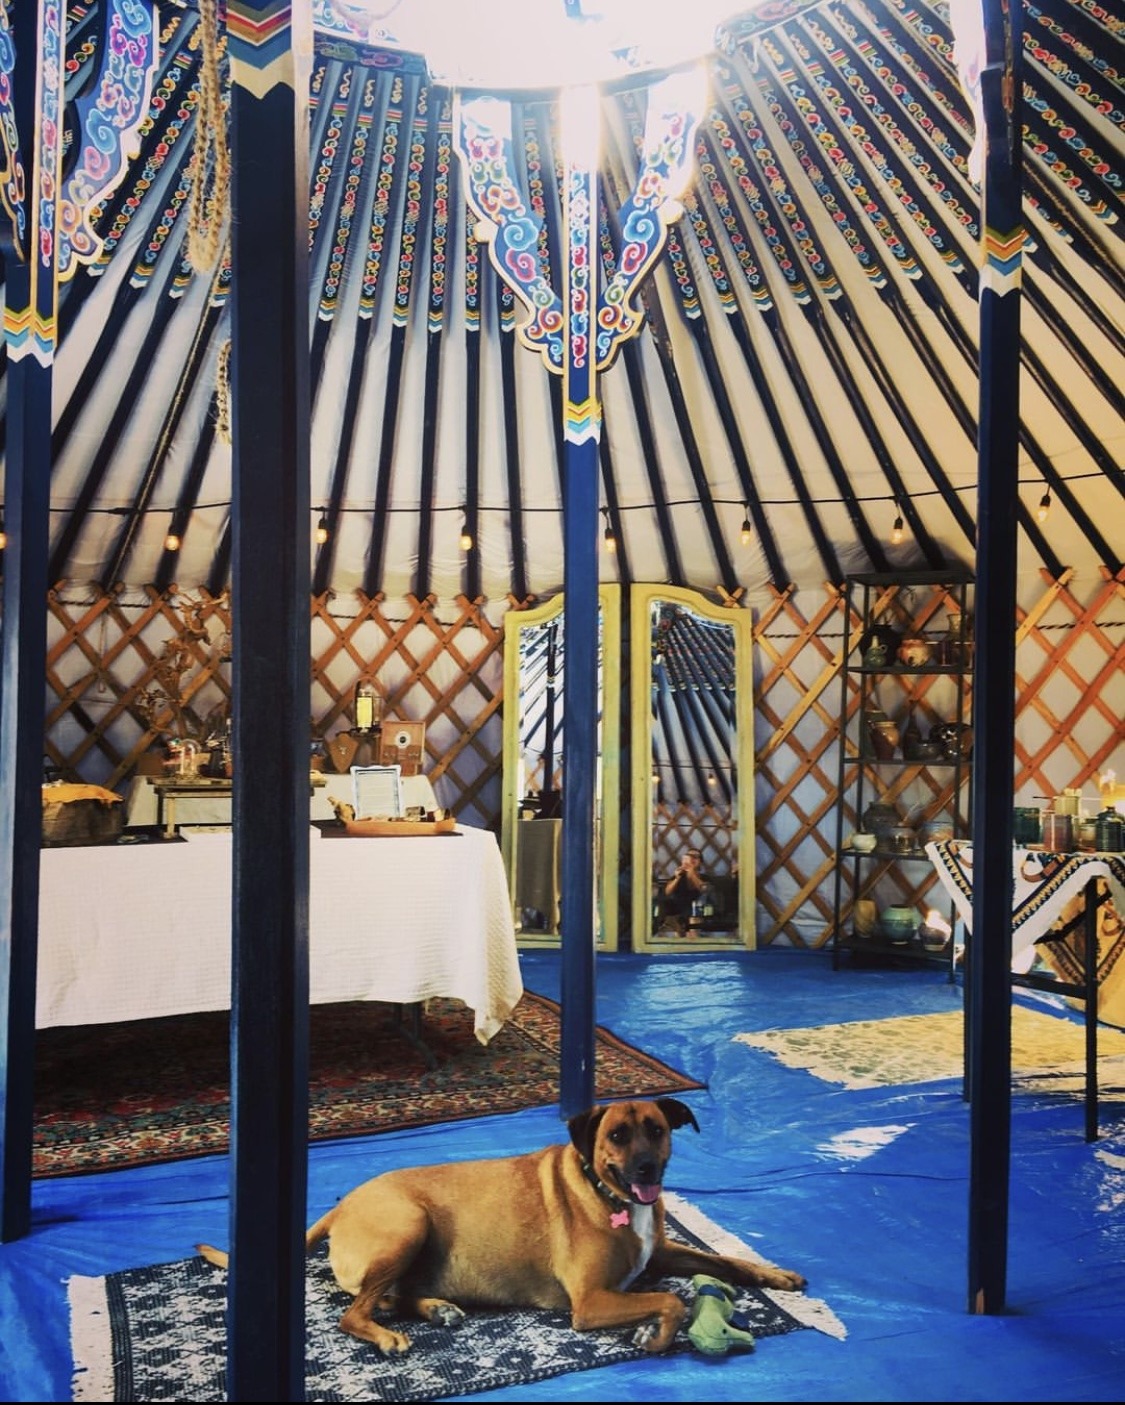 A dog sits on a blanket in the Big Blue Yurt.